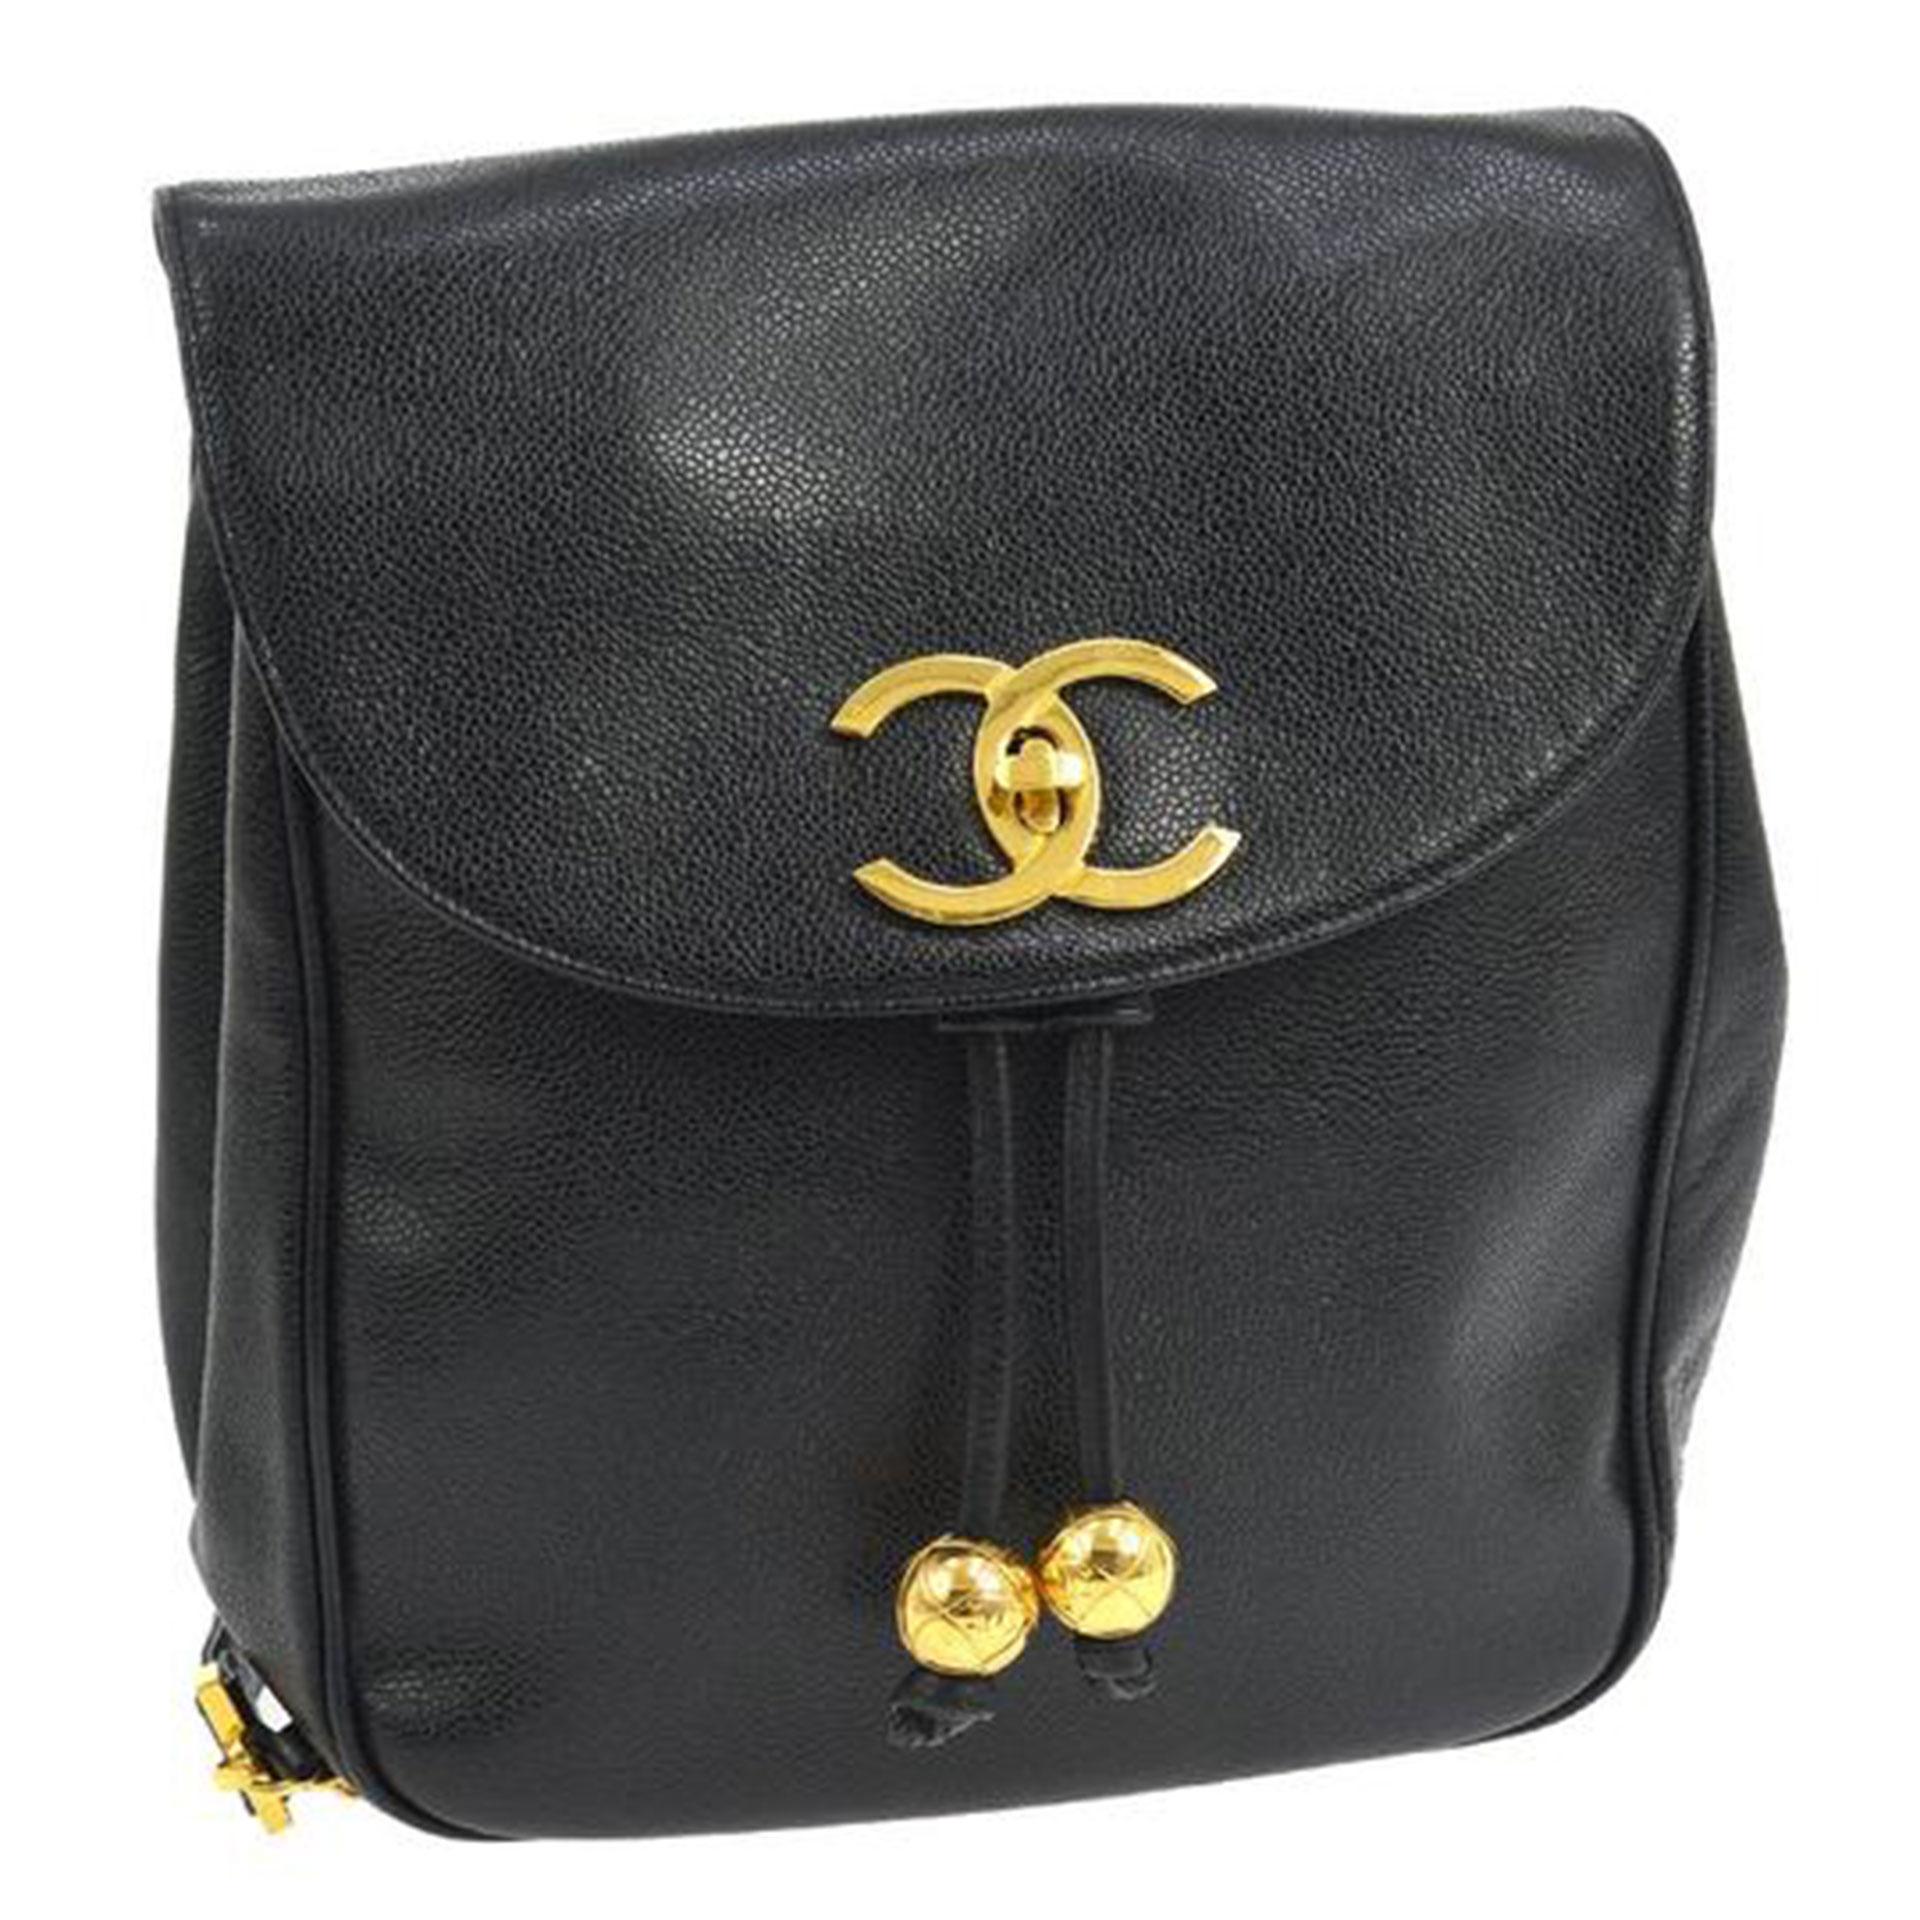 Chanel Black Caviar Backpack Vintage 2 Pocket Ball Charm CC Logo

Chanel Black Caviar Backpack with golden ball charms.
 This chic vintage Chanel backpack is ideal for everyday style about town. From 1990's. 
Straps measure 30